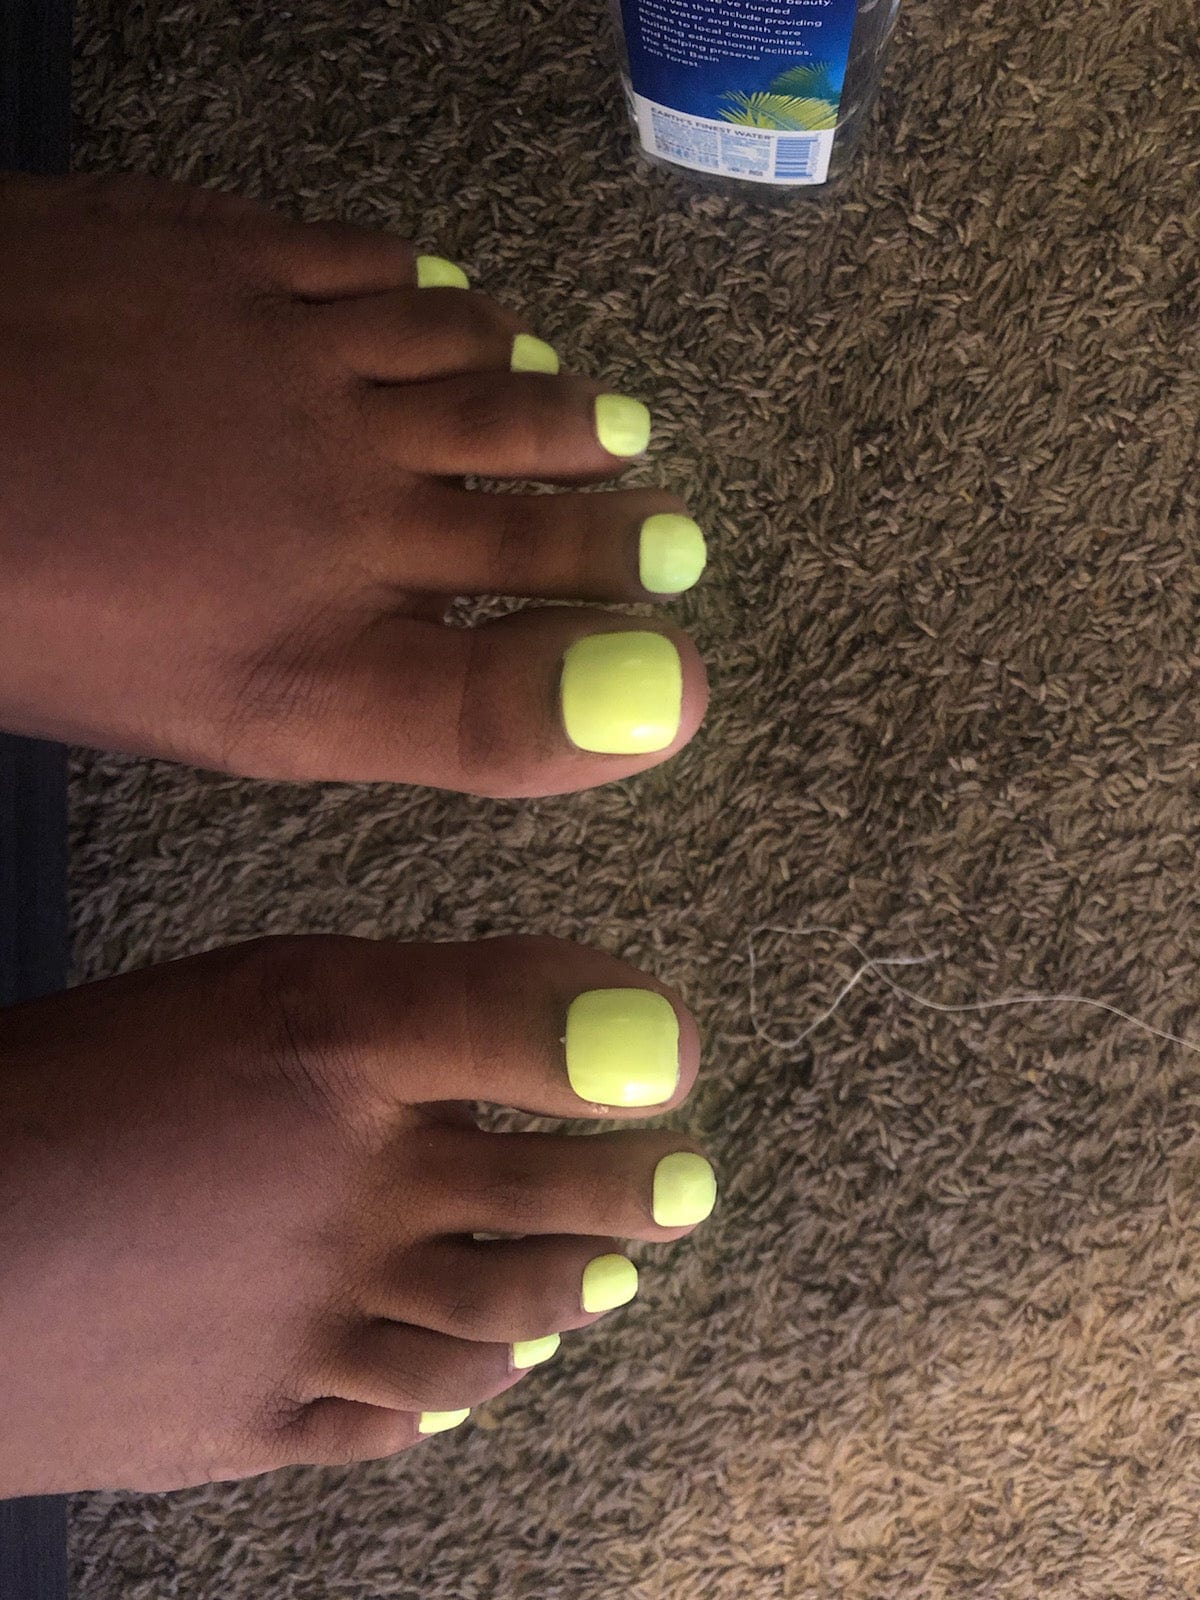 NailedbyNiki2swt Beauty and Nails Pedi in a Pinch Press on Nails Self Care Accessories